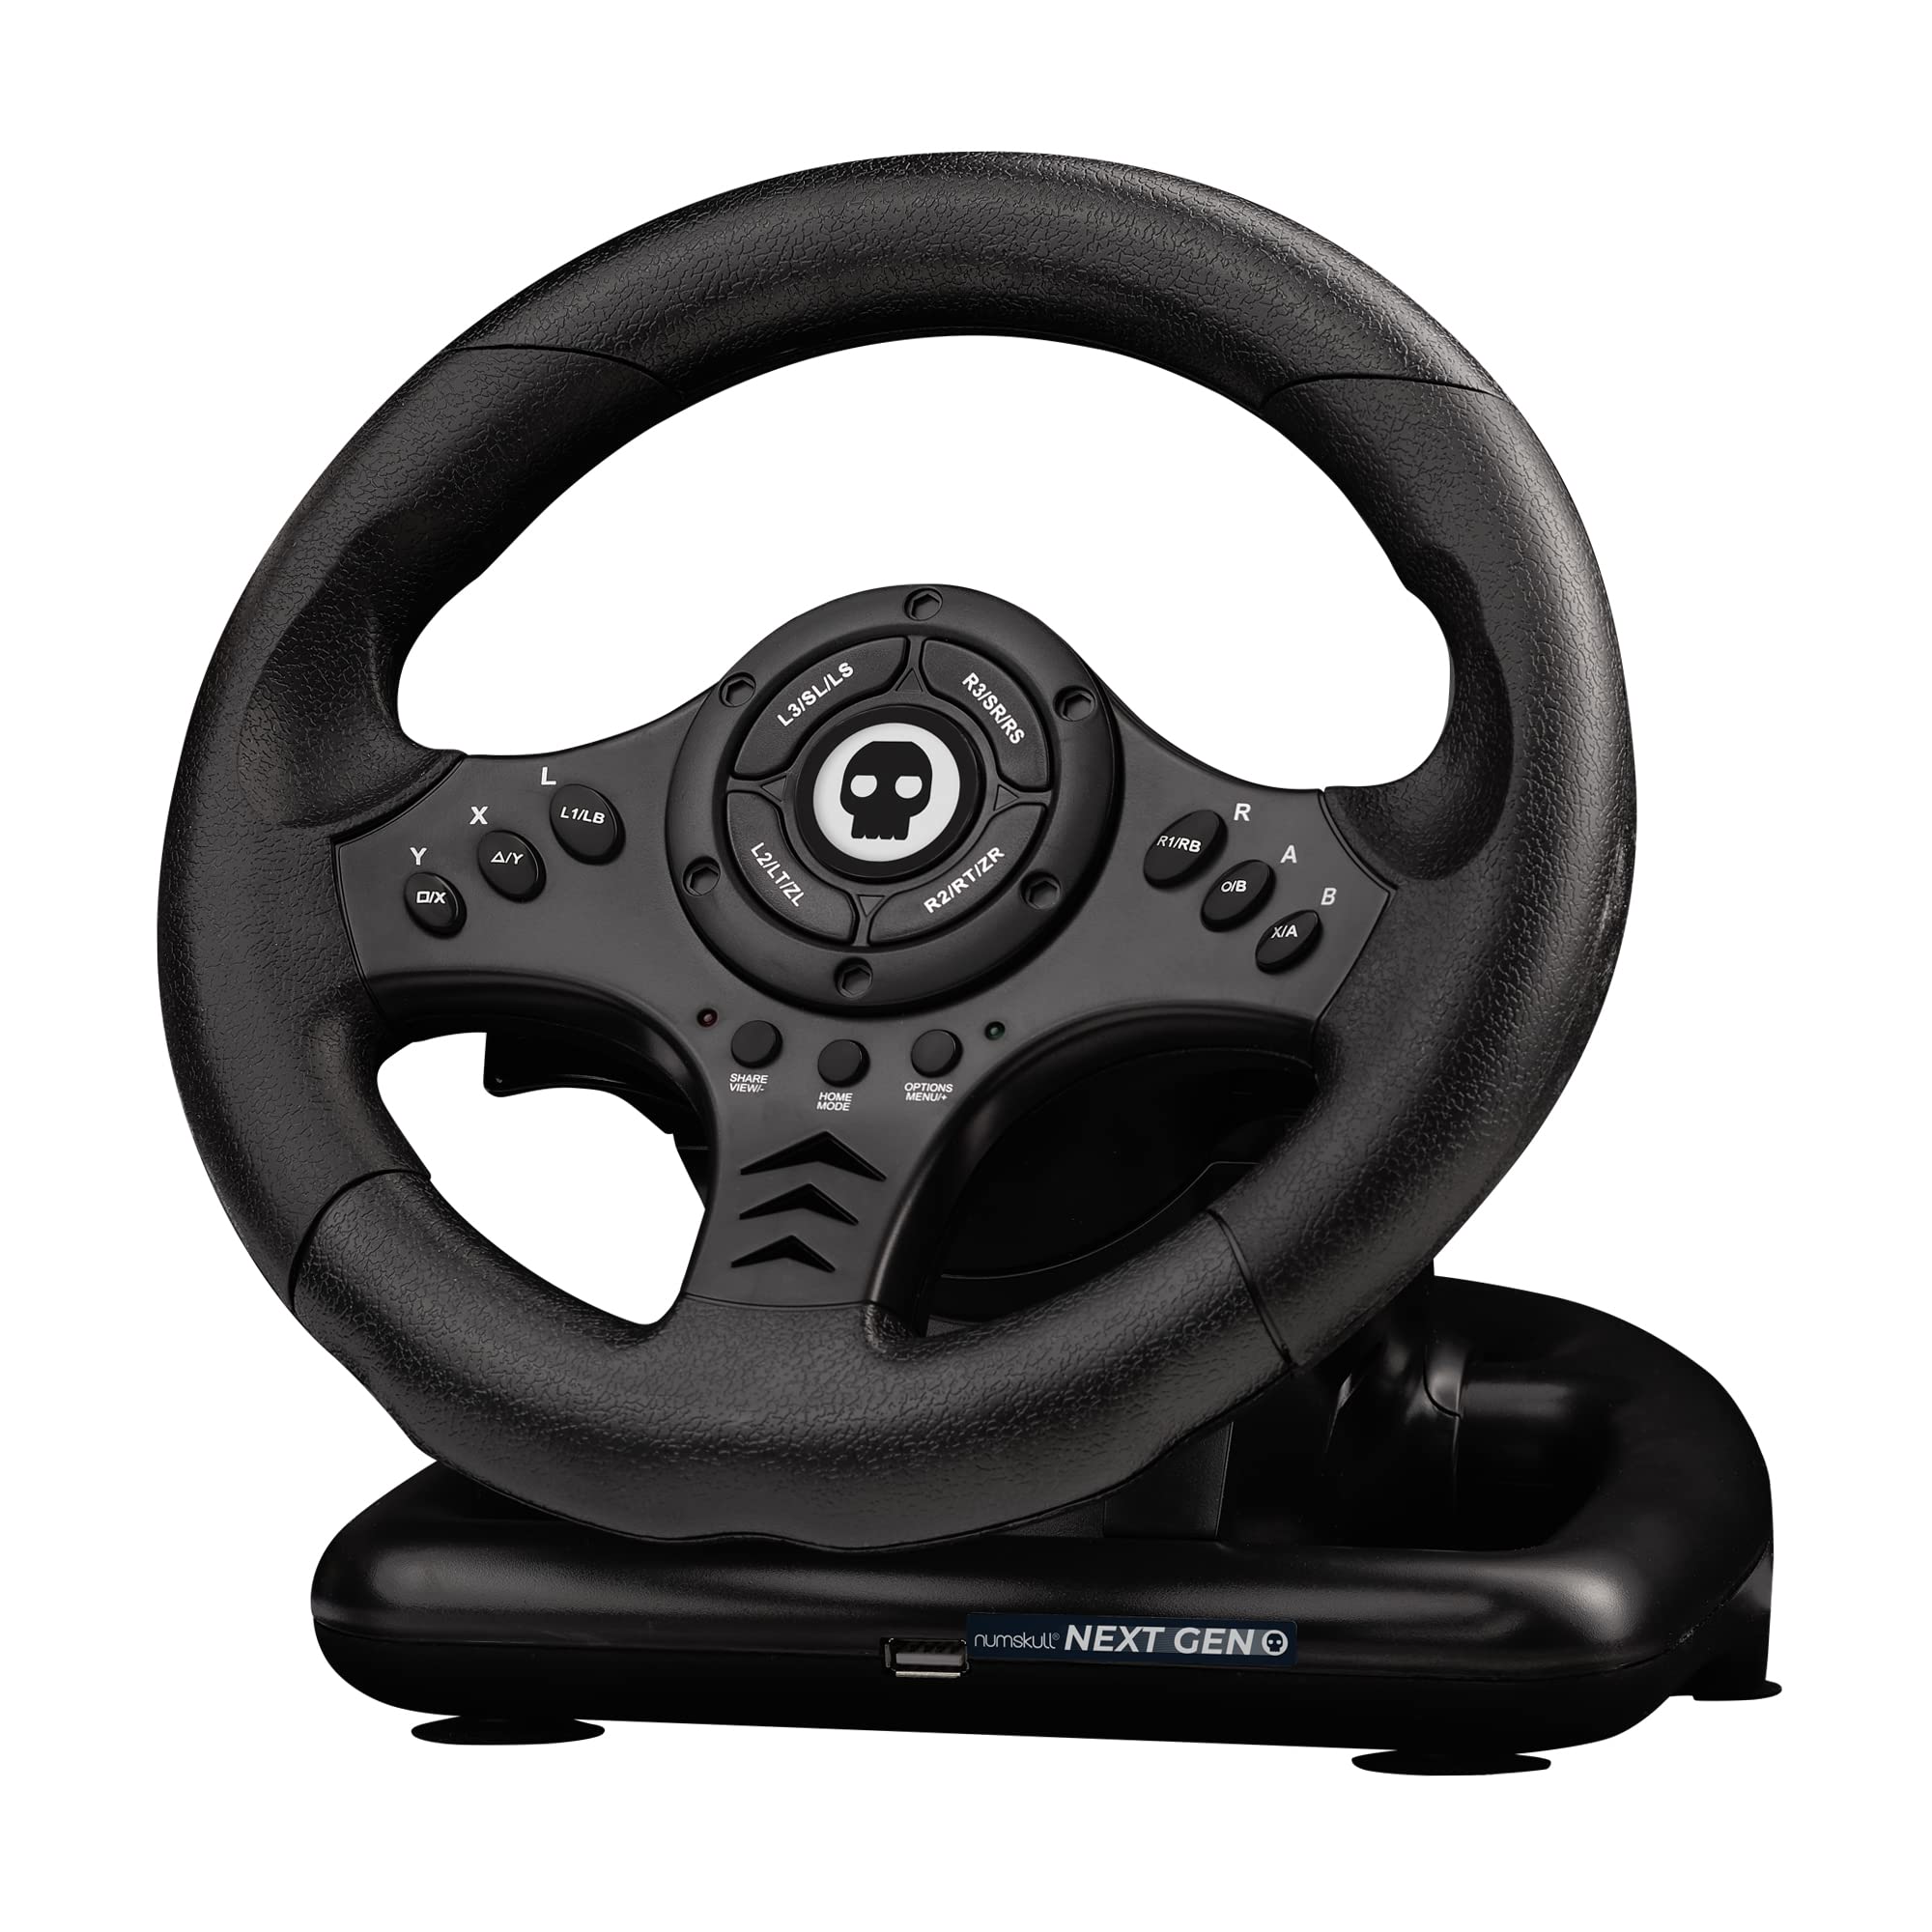 Numskull Next-Gen Multi Format Racing Wheel 2022 with Pedals - Compatible with Xbox Series X|S, Xbox One, PS4, Nintendo Switch and PC - Realistic Steering Wheel Controller Accessory